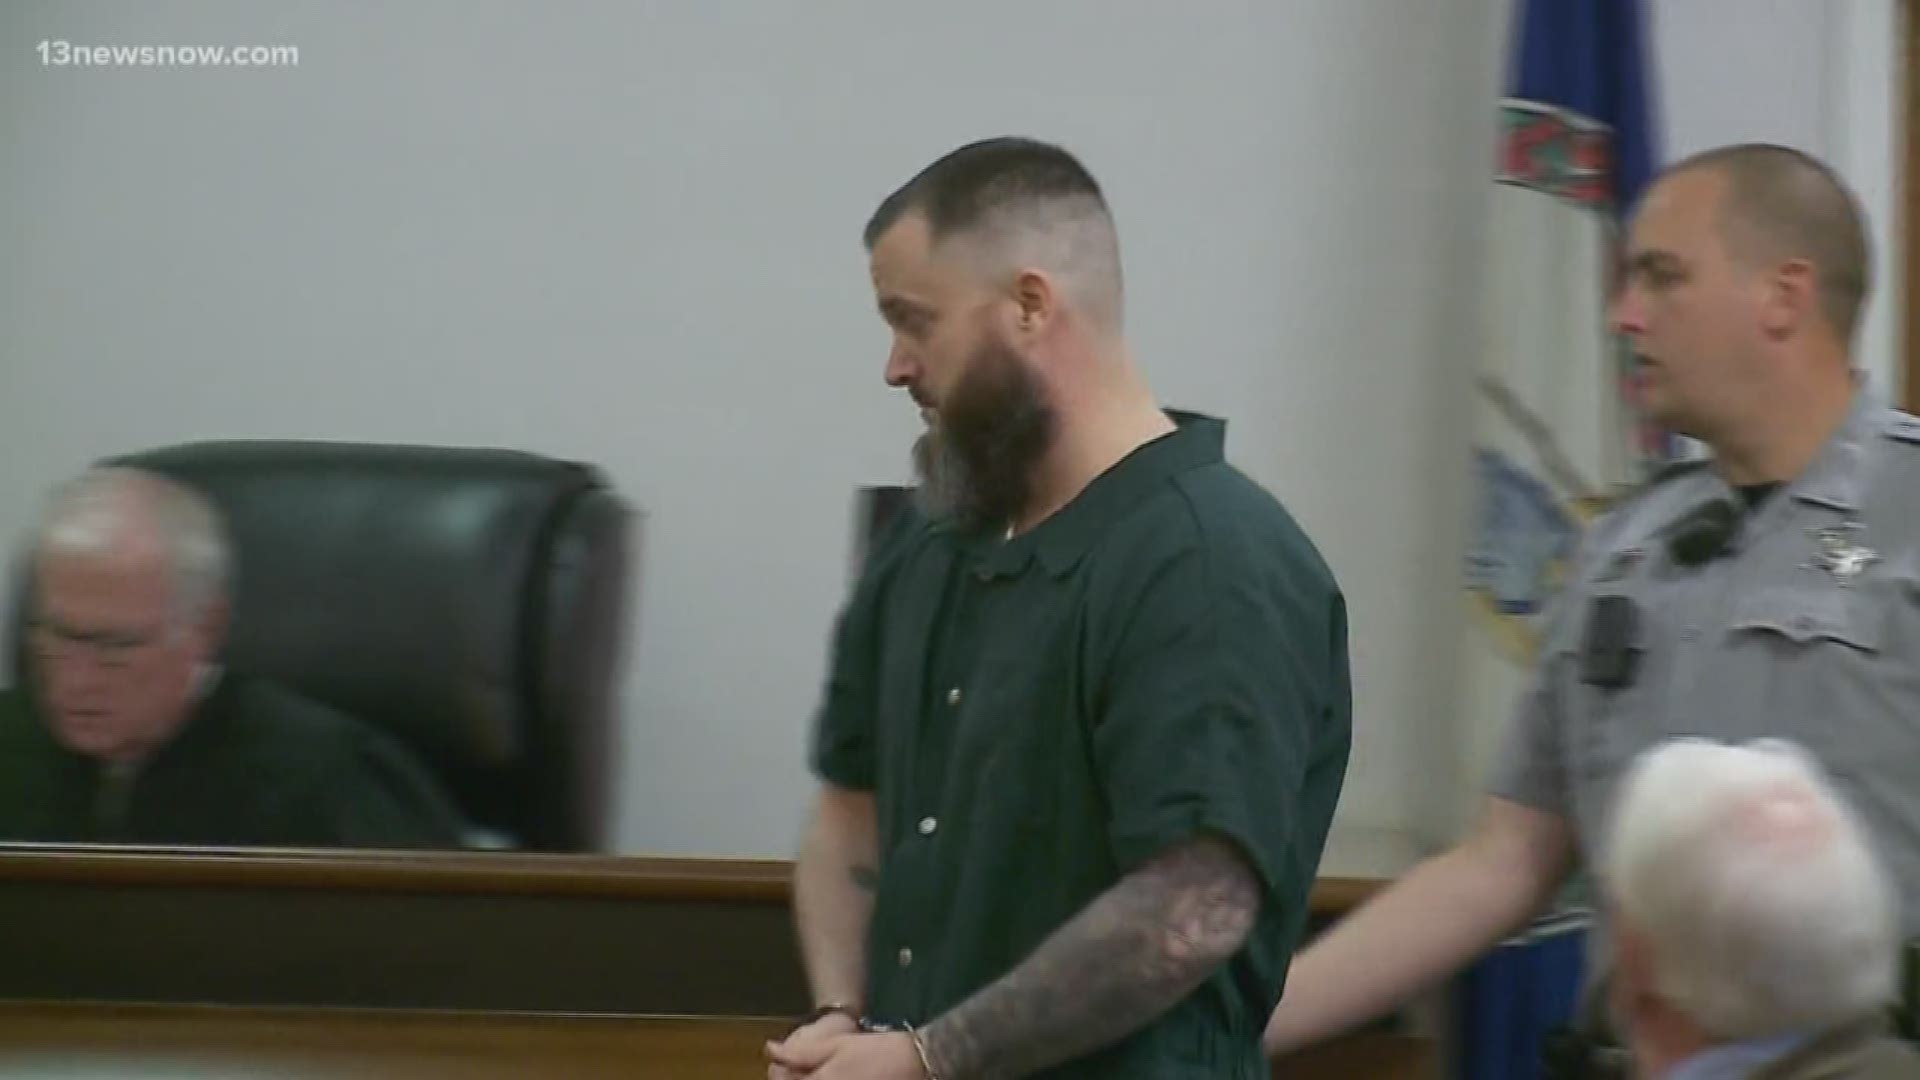 Wesley Hadsell is accused of distributing drugs while incarcerated at Southampton County Jail. He is awaiting trial for the killing of Anjelica 'AJ' Hadsell in 2015.